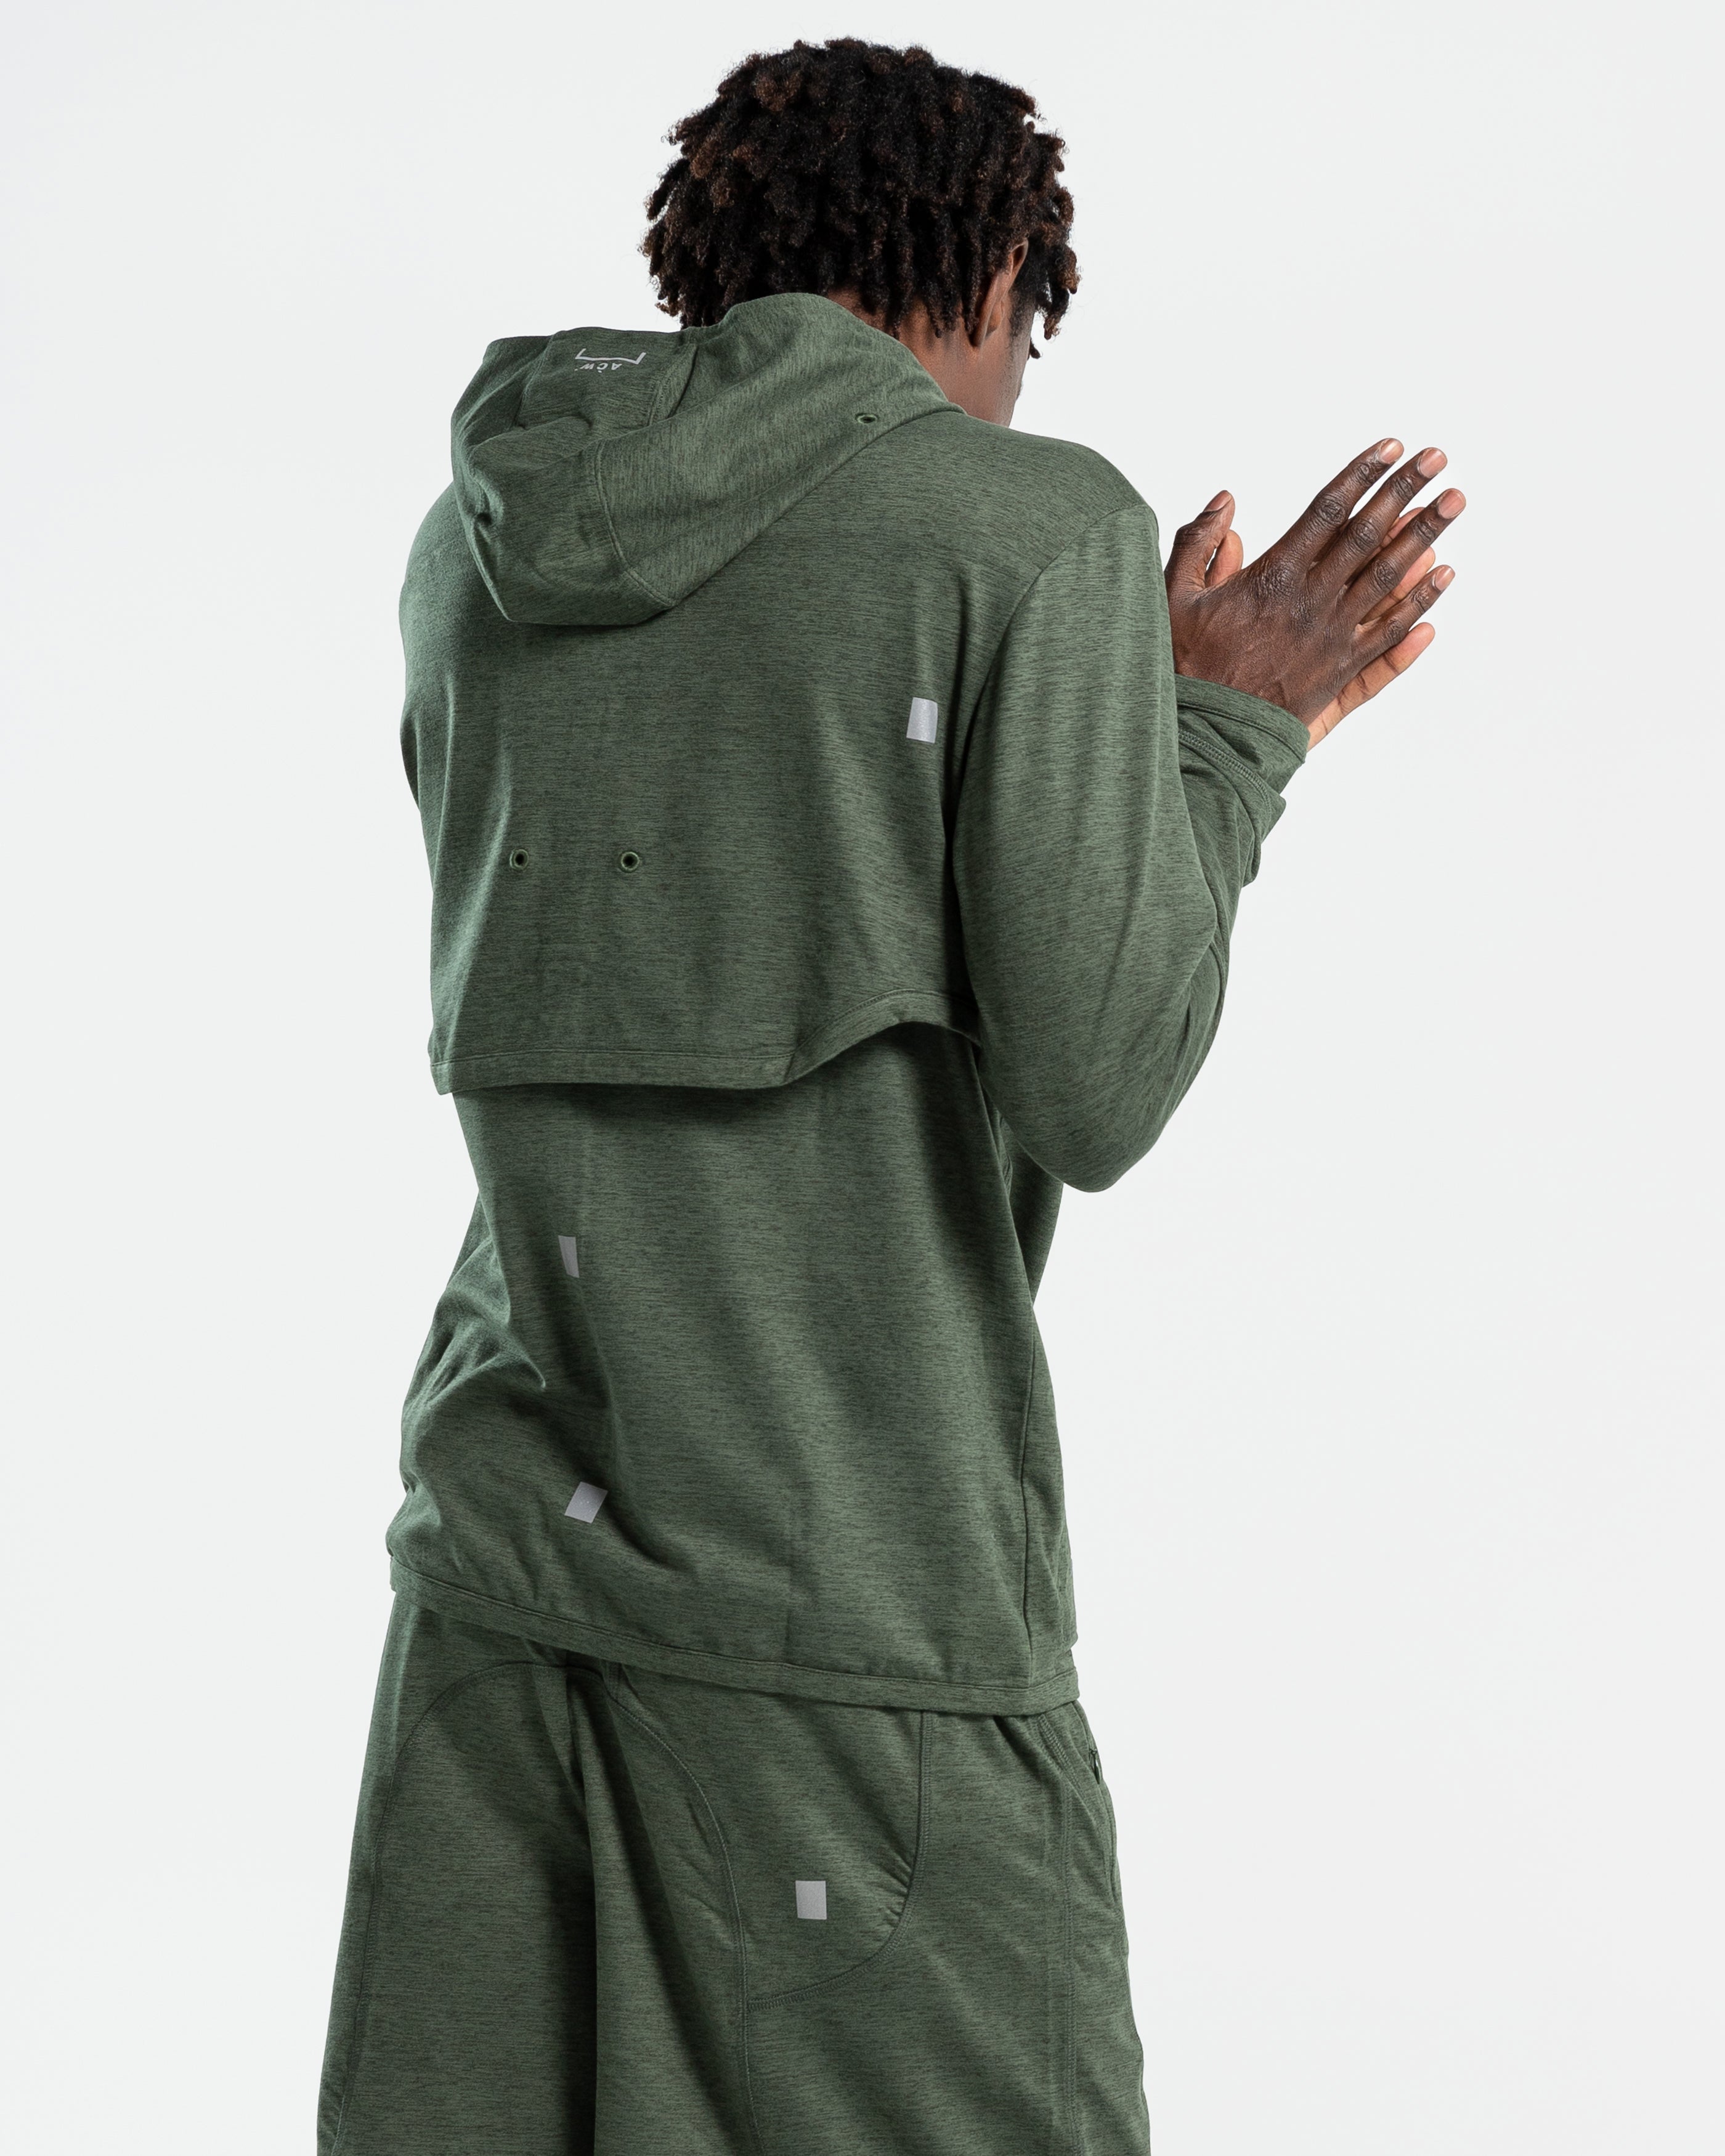 Body Map Track Top in Forest Green